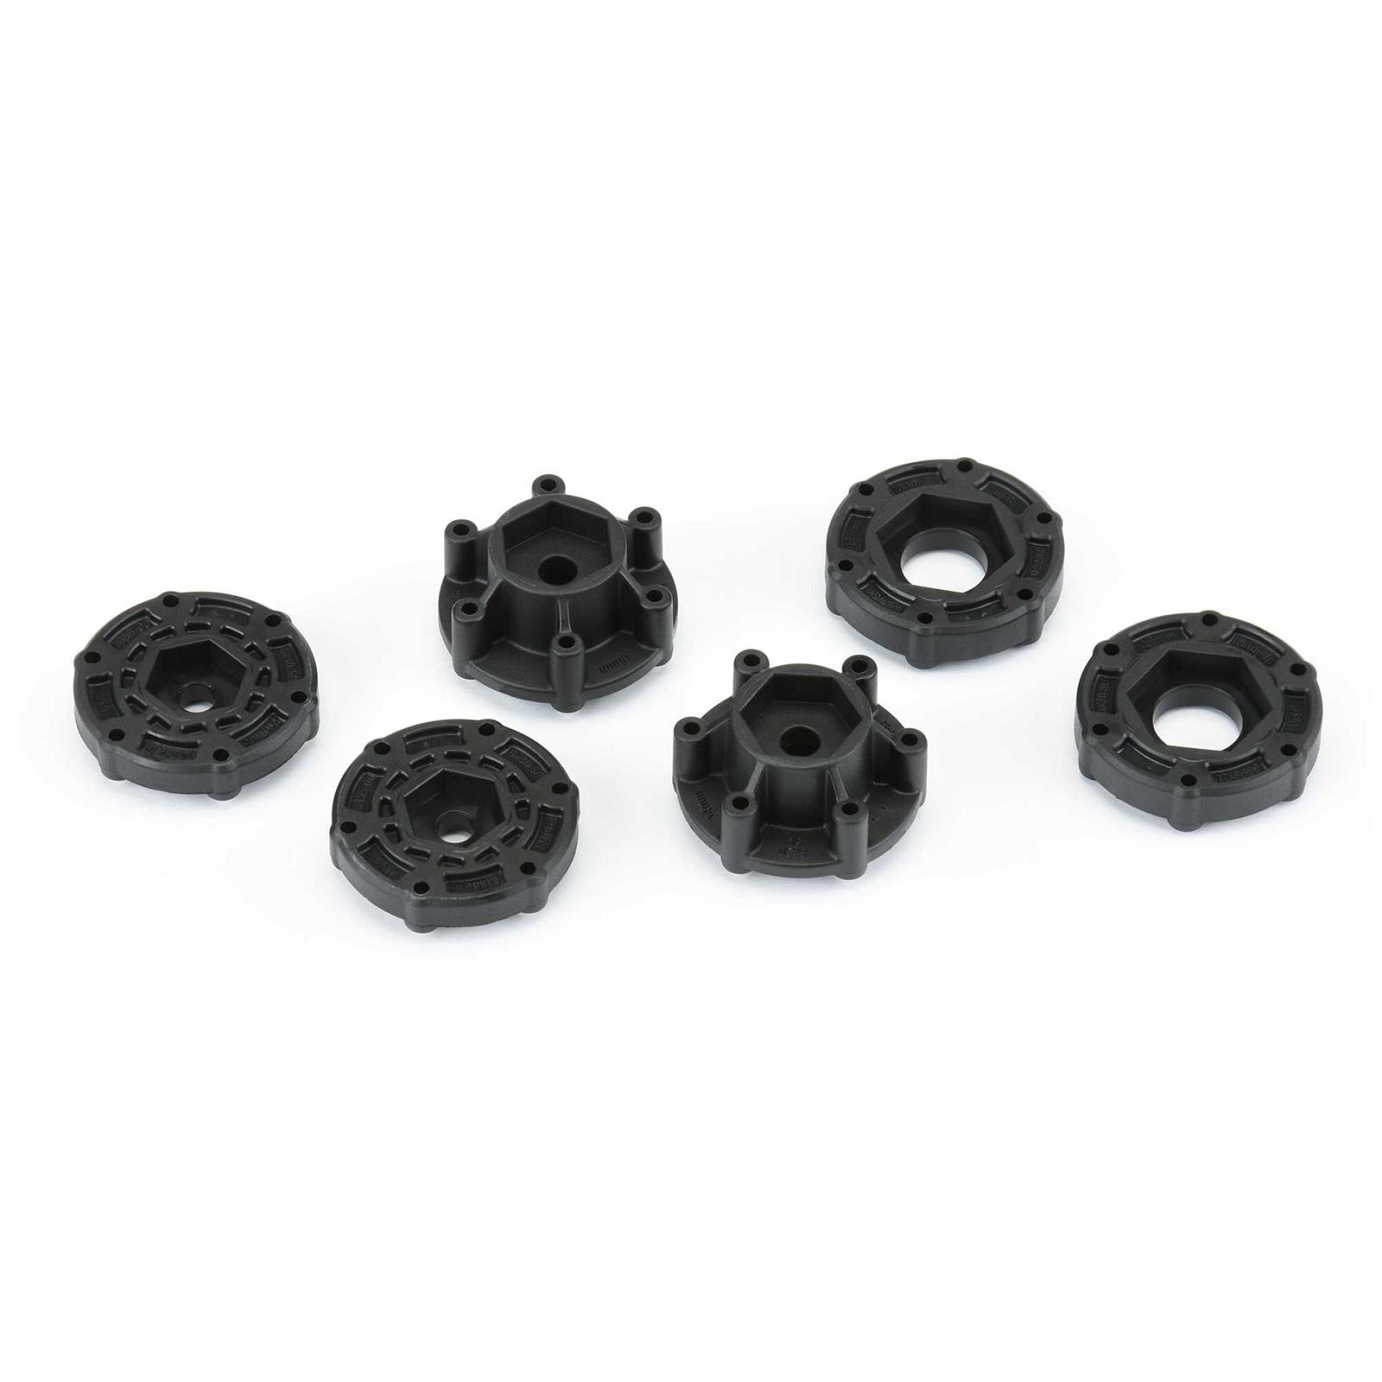 Proline 6x30 to 12mm ProTrac Short Course Hex Adapters 6x30 SC W